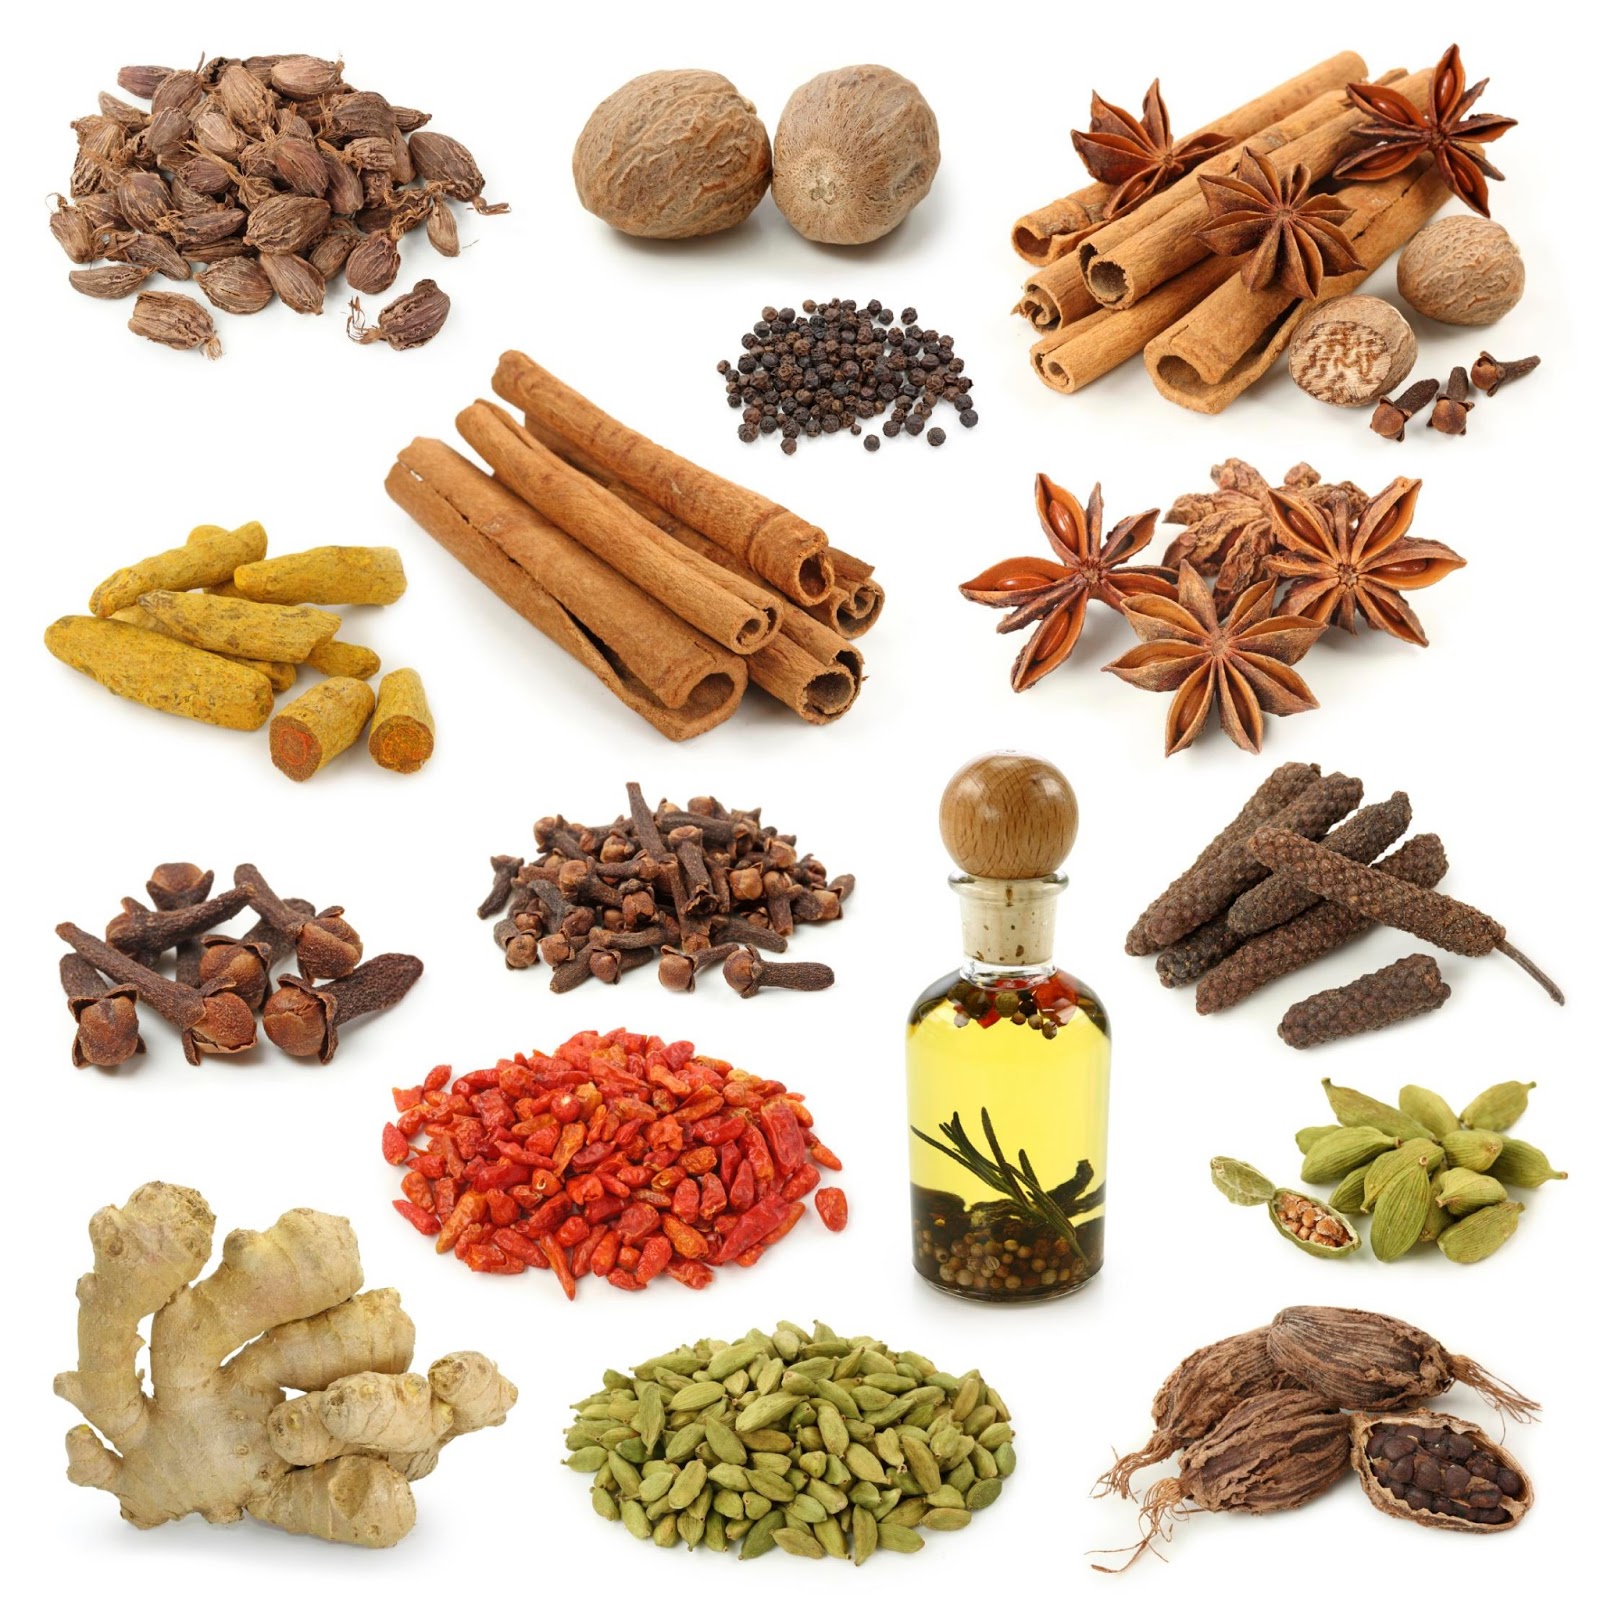 Spices: Indian spices